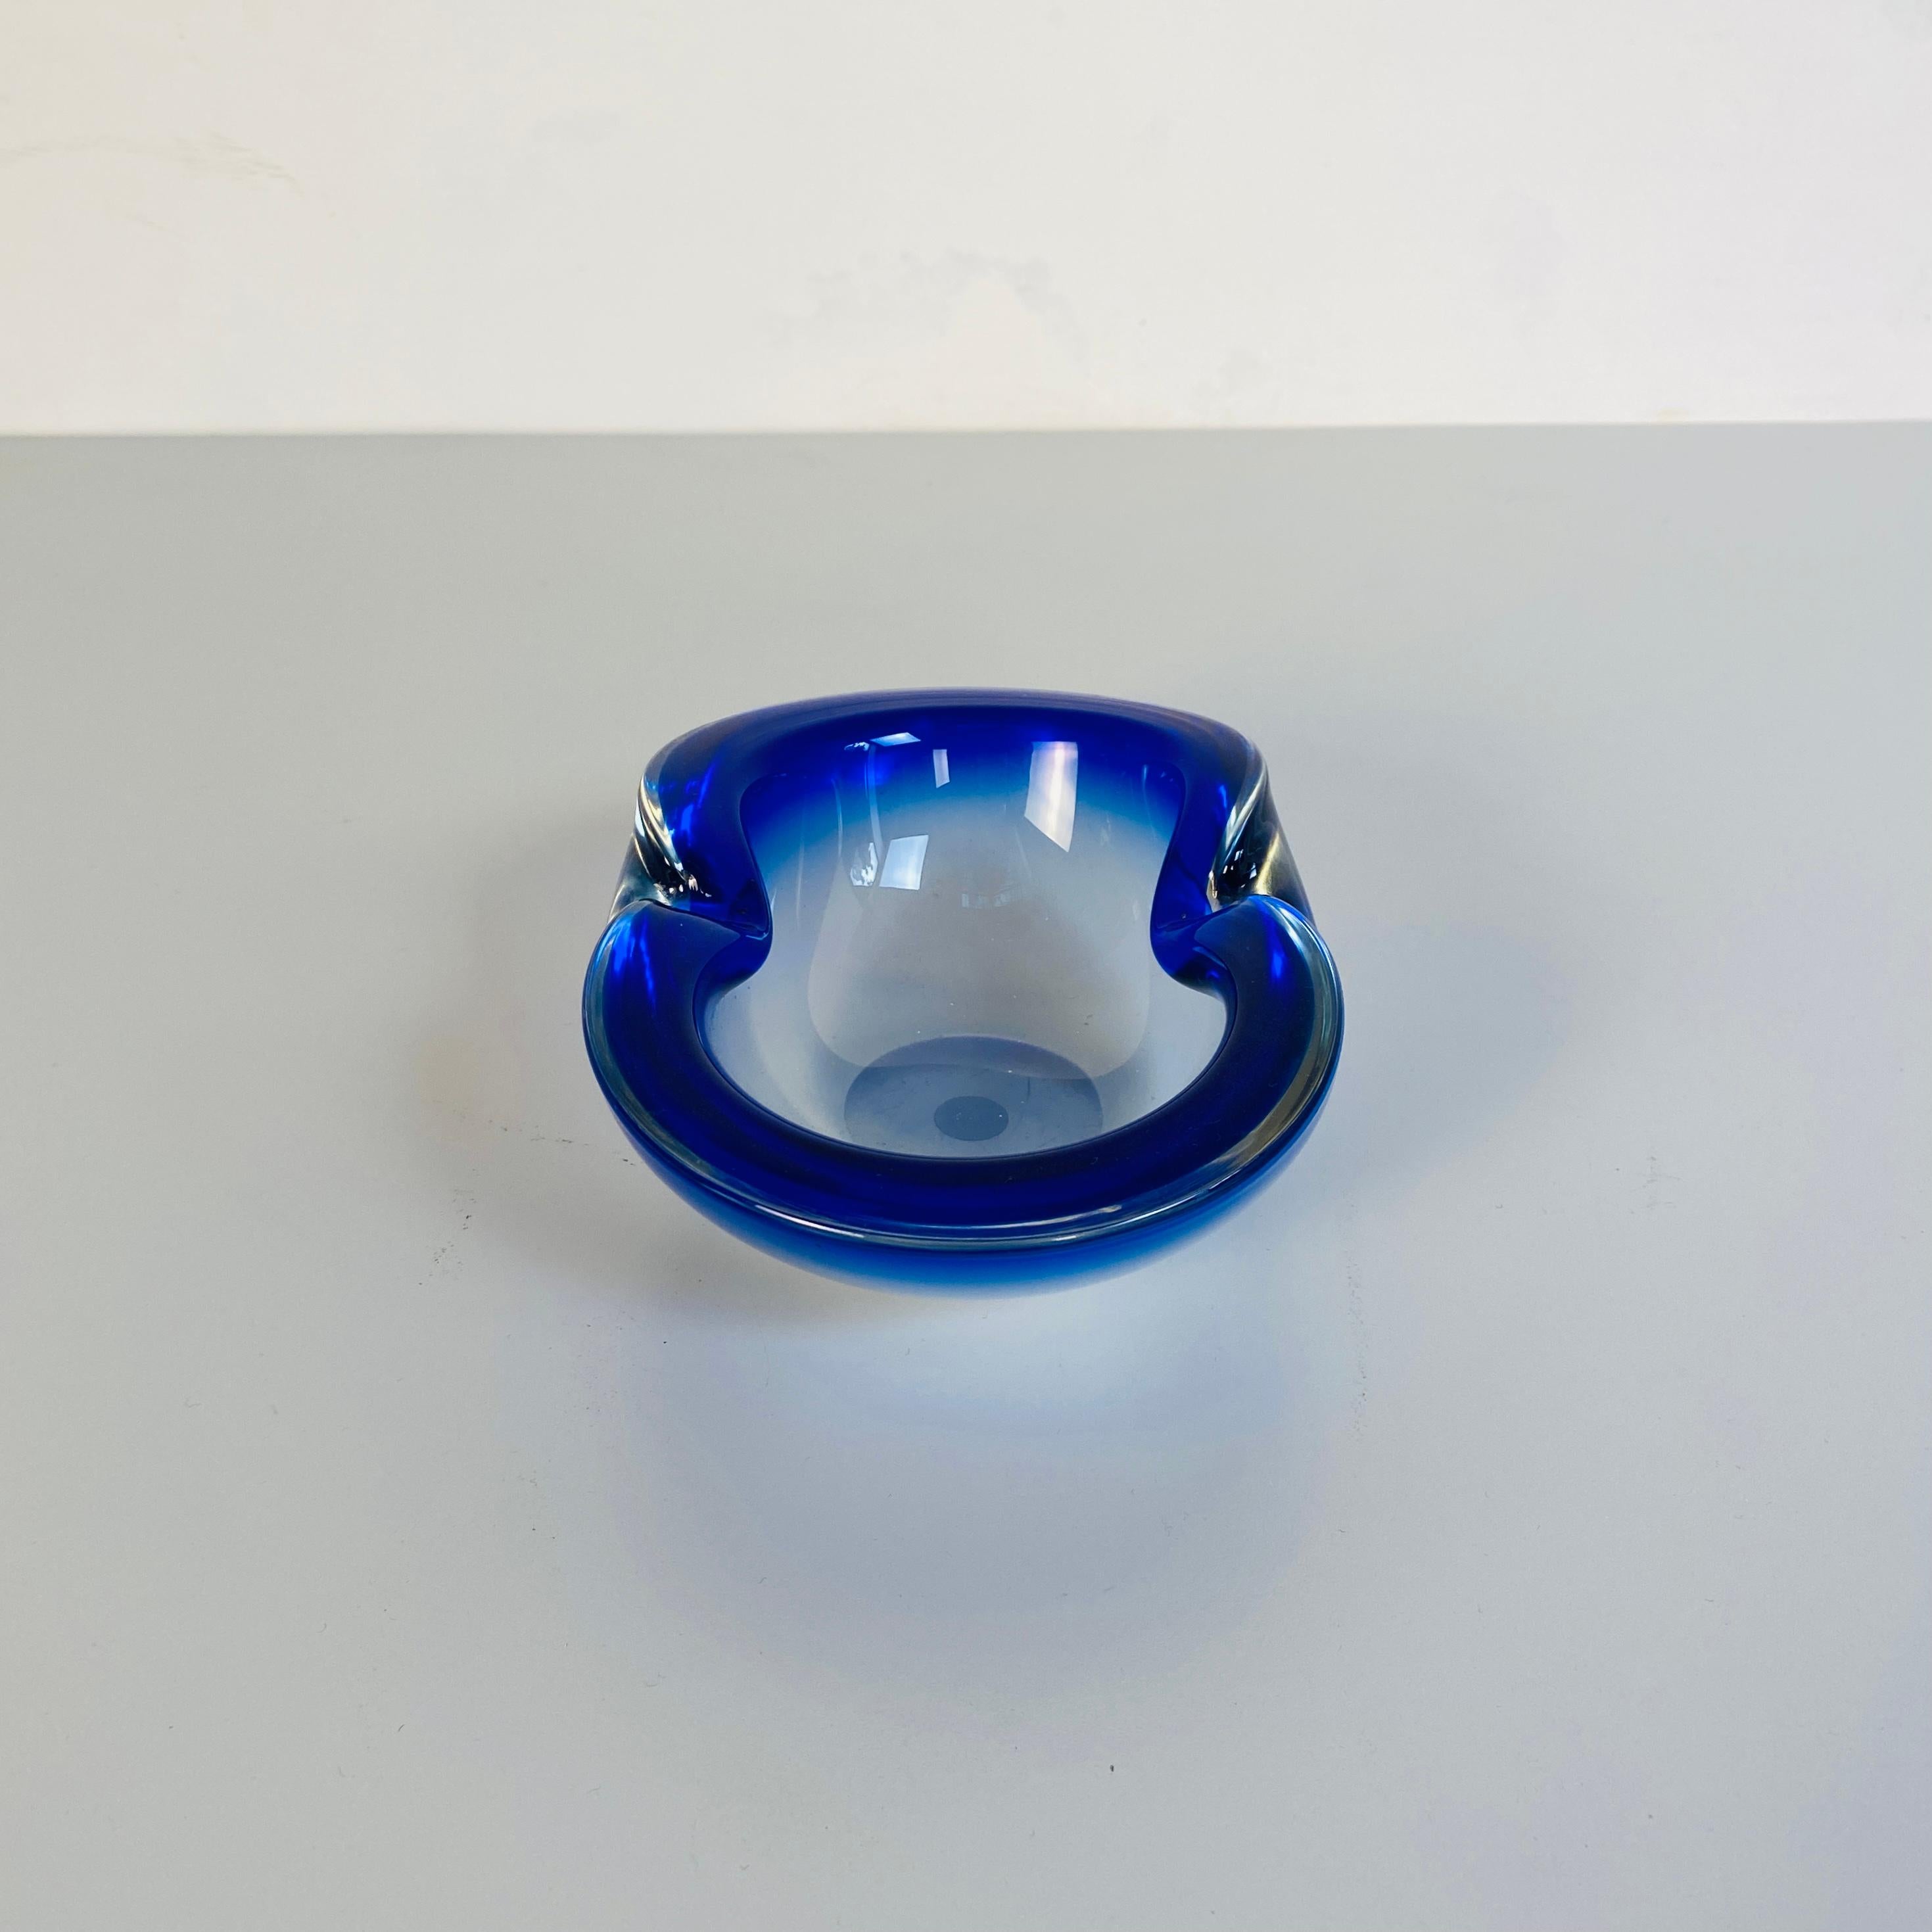 Italian Mid-Century Modern Murano Glass Oval Object Holder in Blue, 1970s For Sale 2